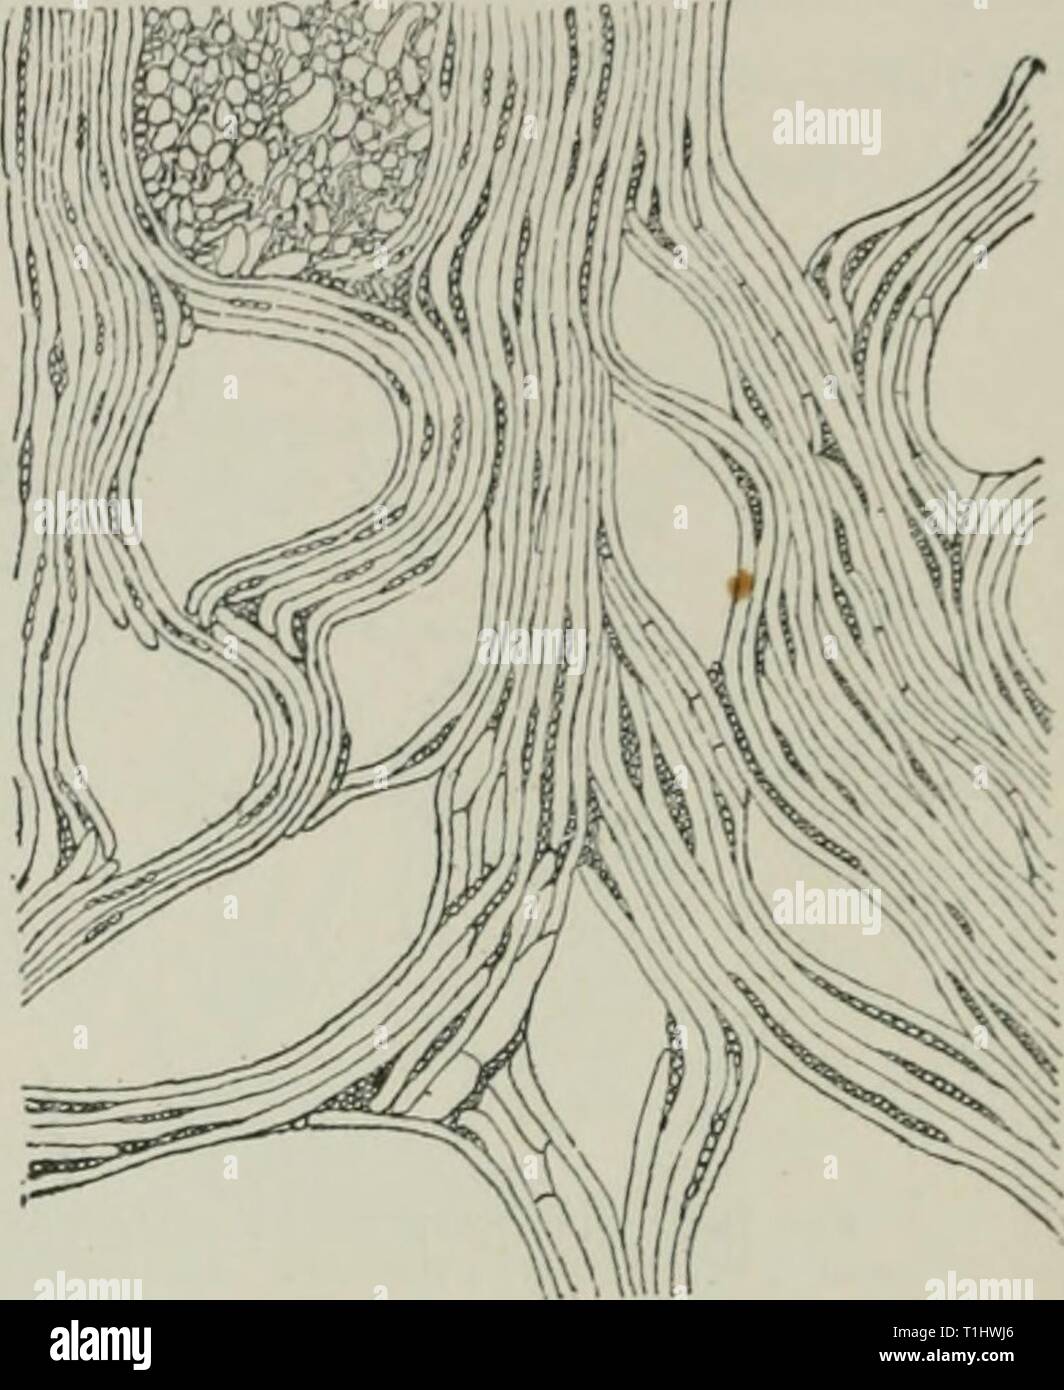 Diseases of plants induced by Diseases of plants induced by cryptogamic parasites; introduction to the study of pathogenic Fungi, slime-Fungi, bacteria, & Algae  diseasesofplant00tube Year: 1897  Fig. 227.—Section of ii nine-year twig of Juniper attacked hy Gymnosporanyimn. The rind under the spore-cushion is much thickened ; the wood towards the same side is much broken up by tracts of parenchyma. (After Wocriile.)    Fio. 22S.—Tangential section through diseased wood beneath a spore-cushion. The wood- elements are much displaced by abnormal tracts of parenchyma. (Only one of the latter has b Stock Photo